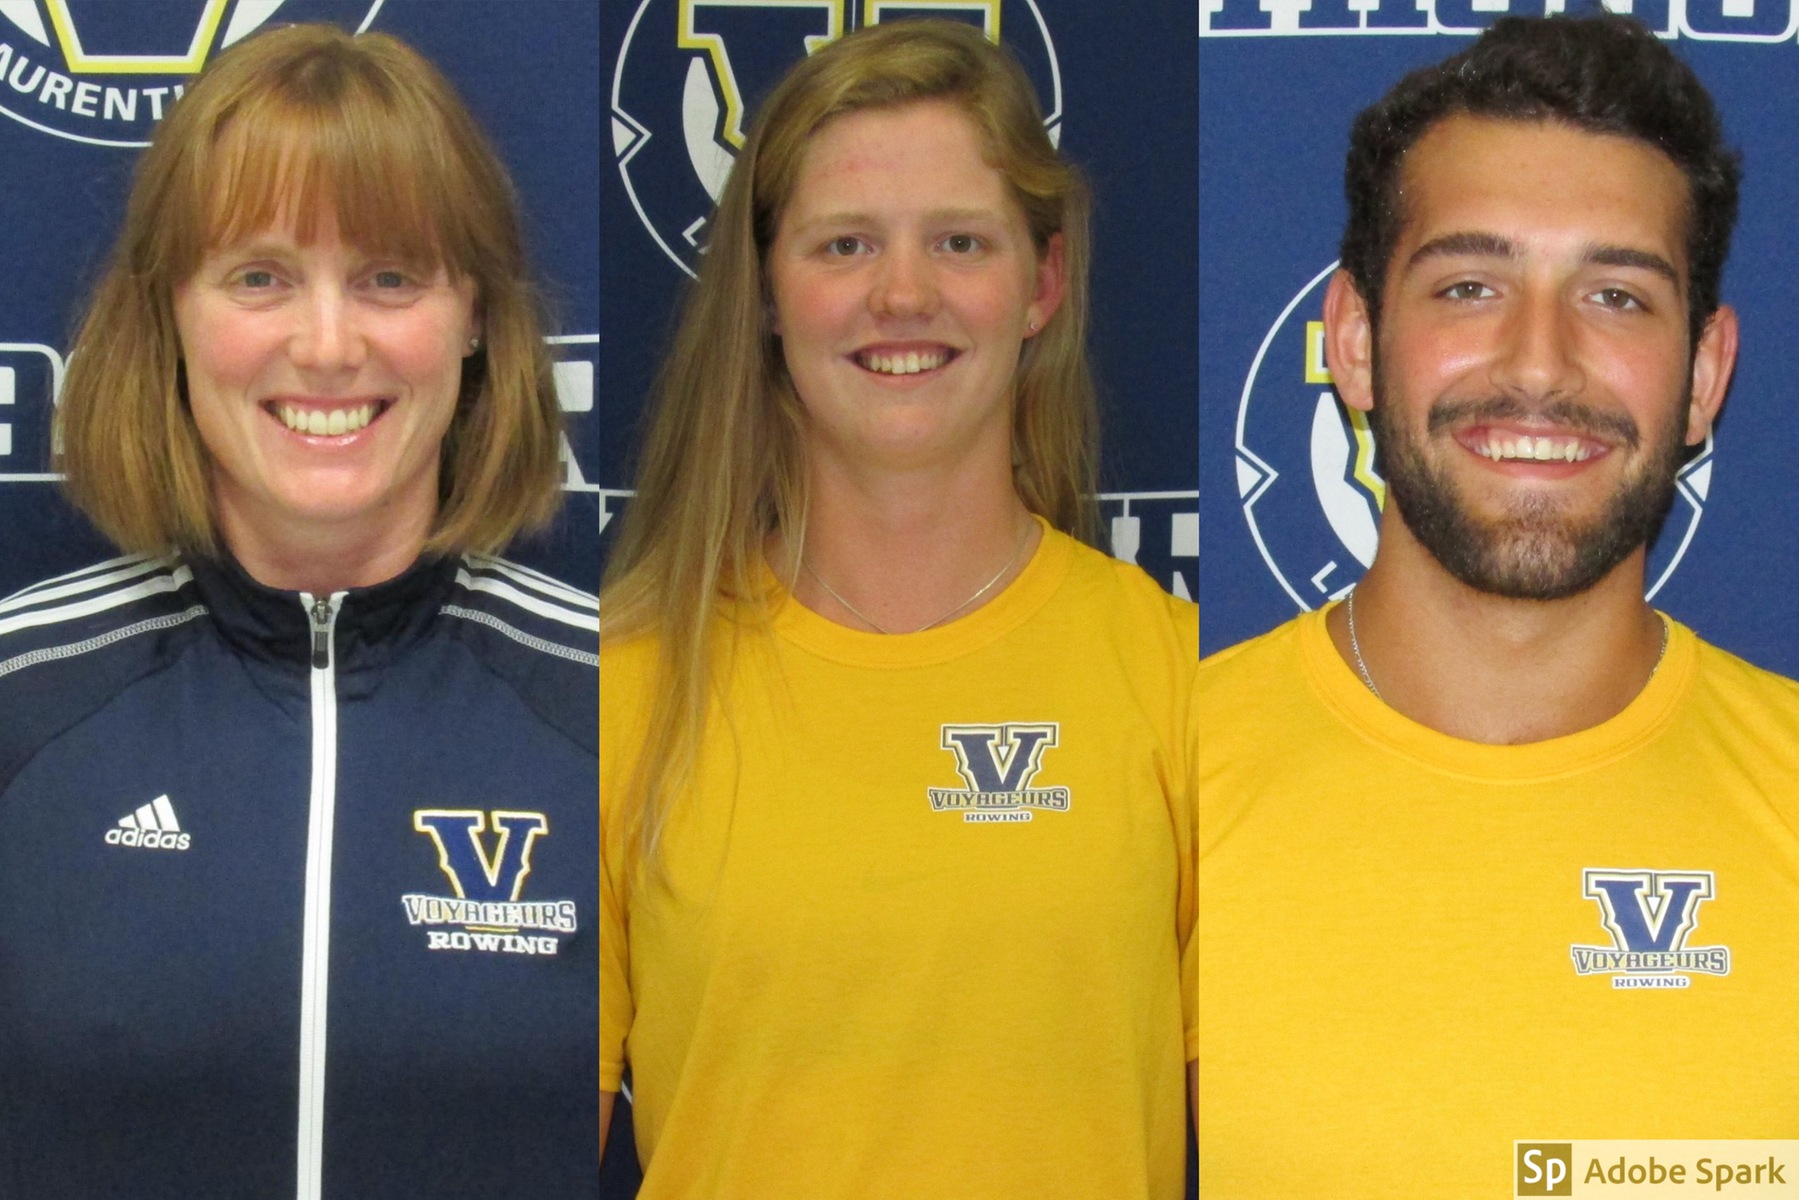 ROW | Voyageurs Show Well on International Stage